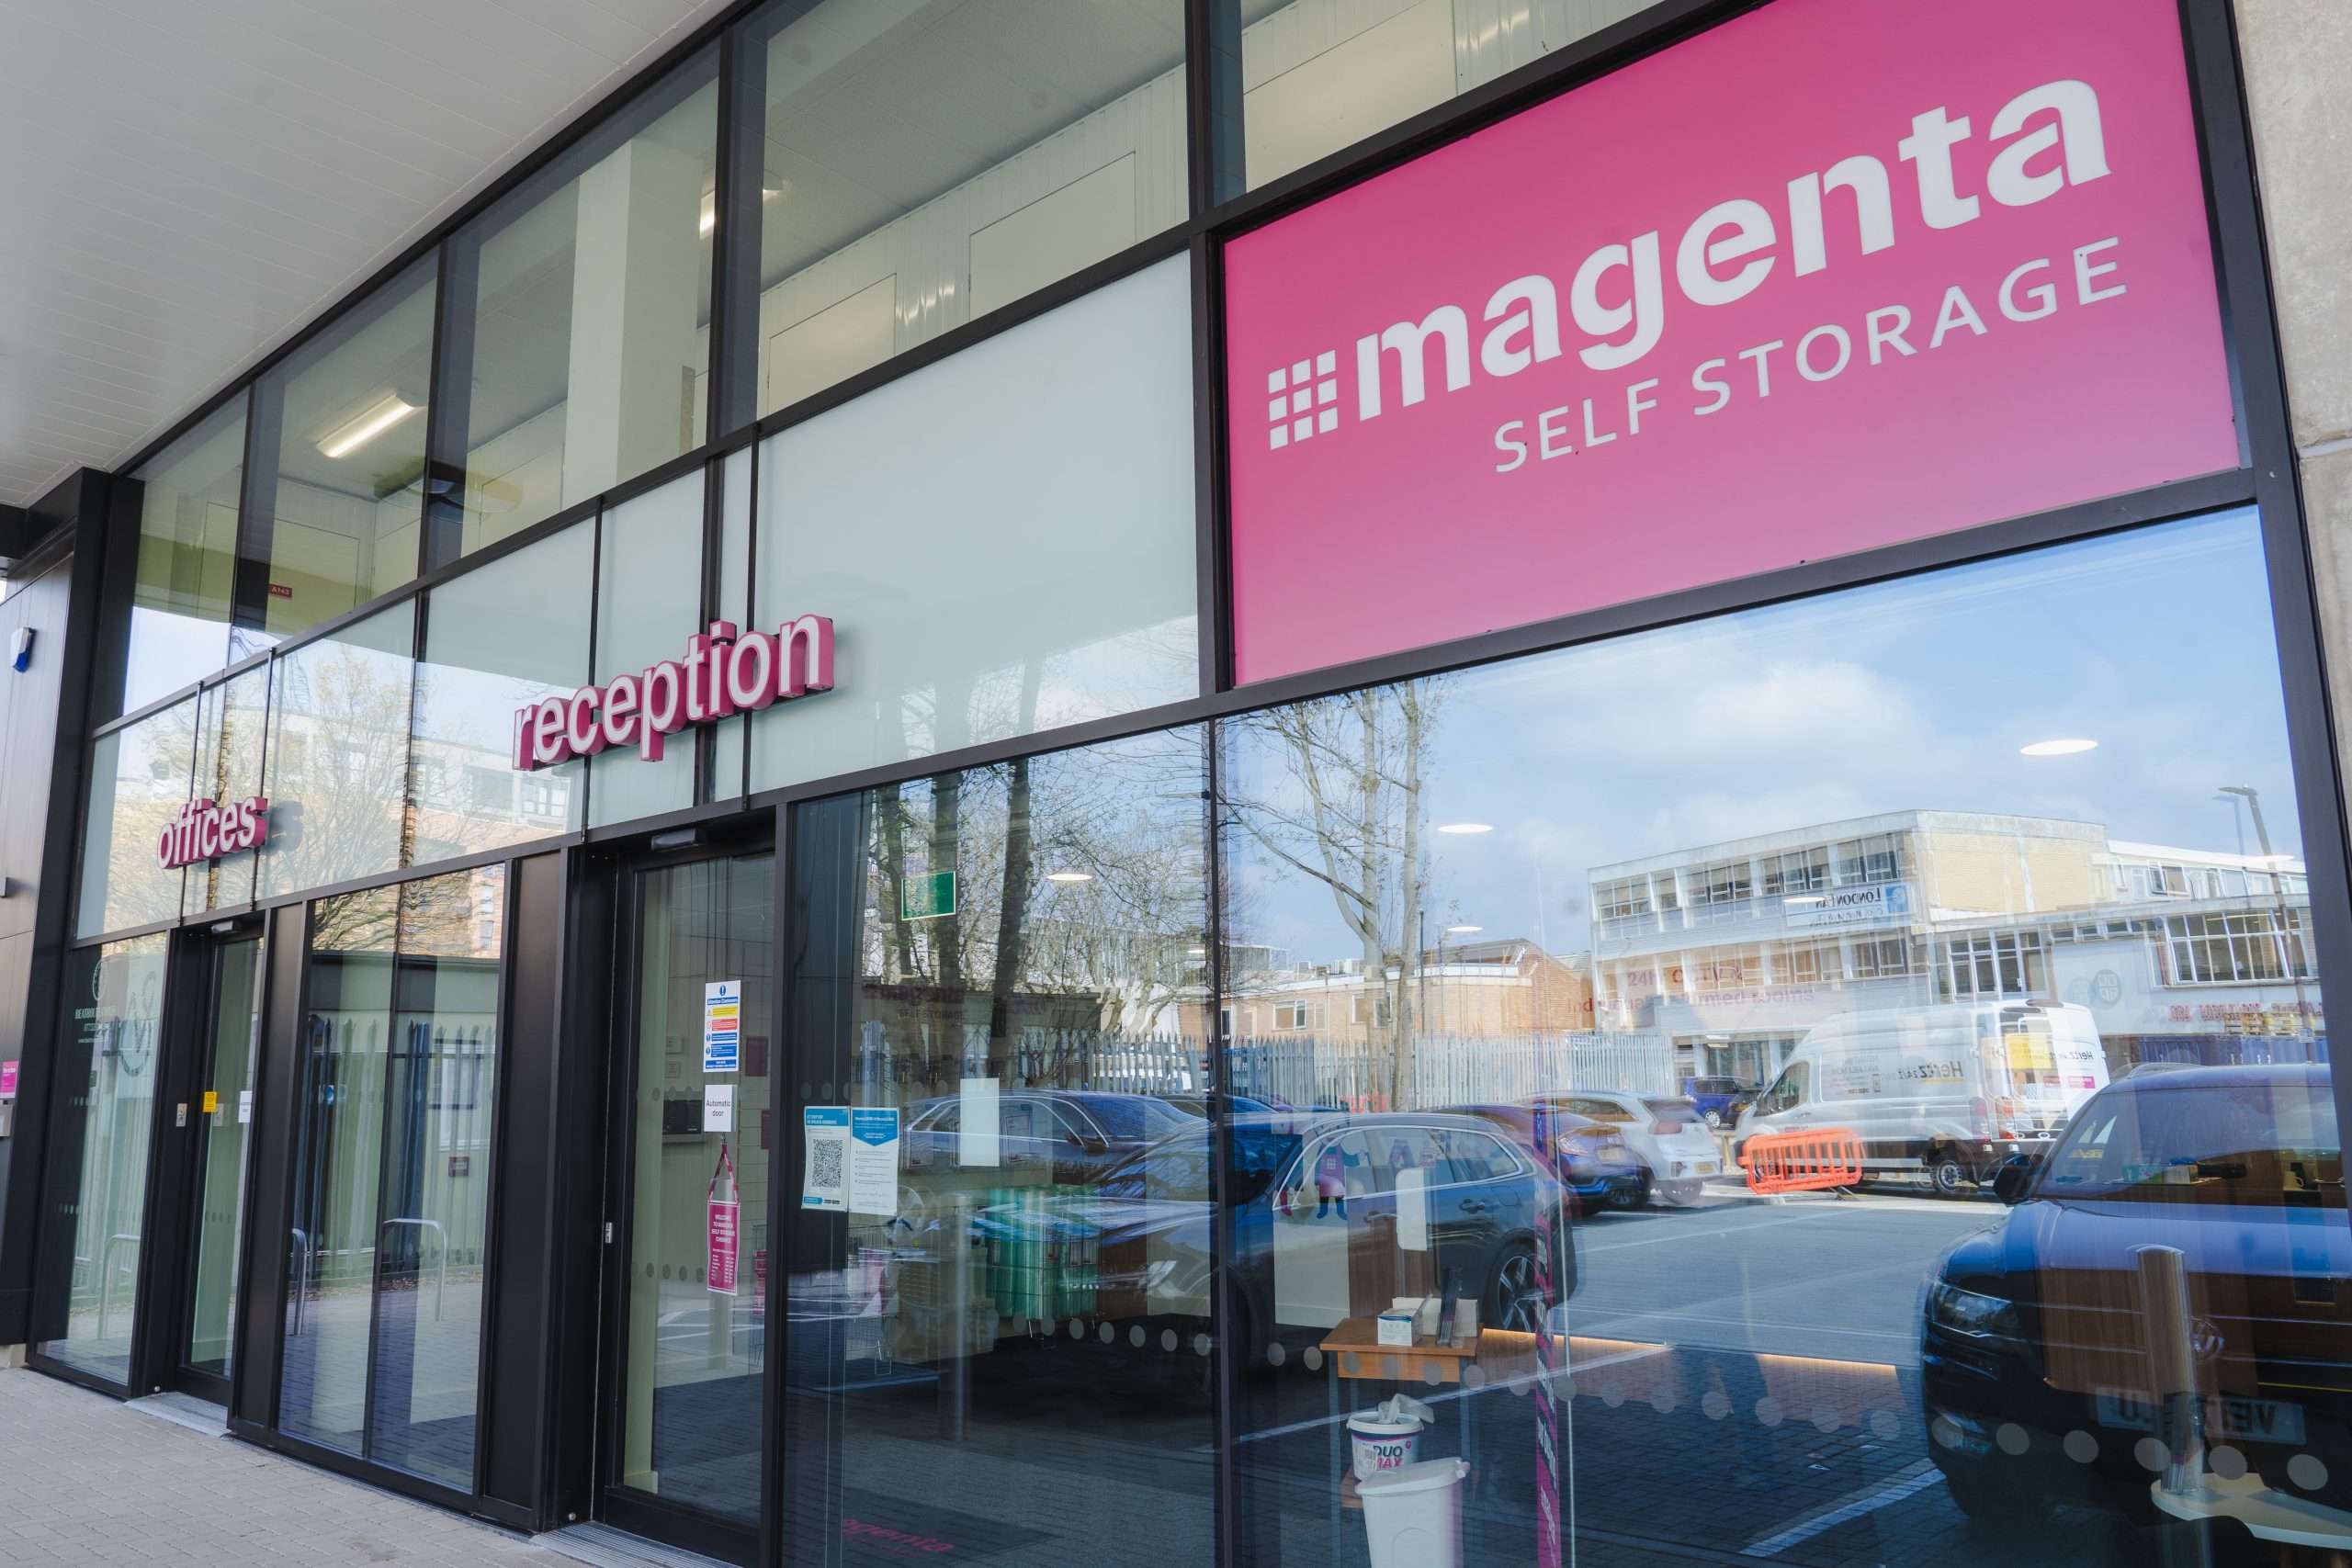 An image of the front reception area of Magenta Self Store